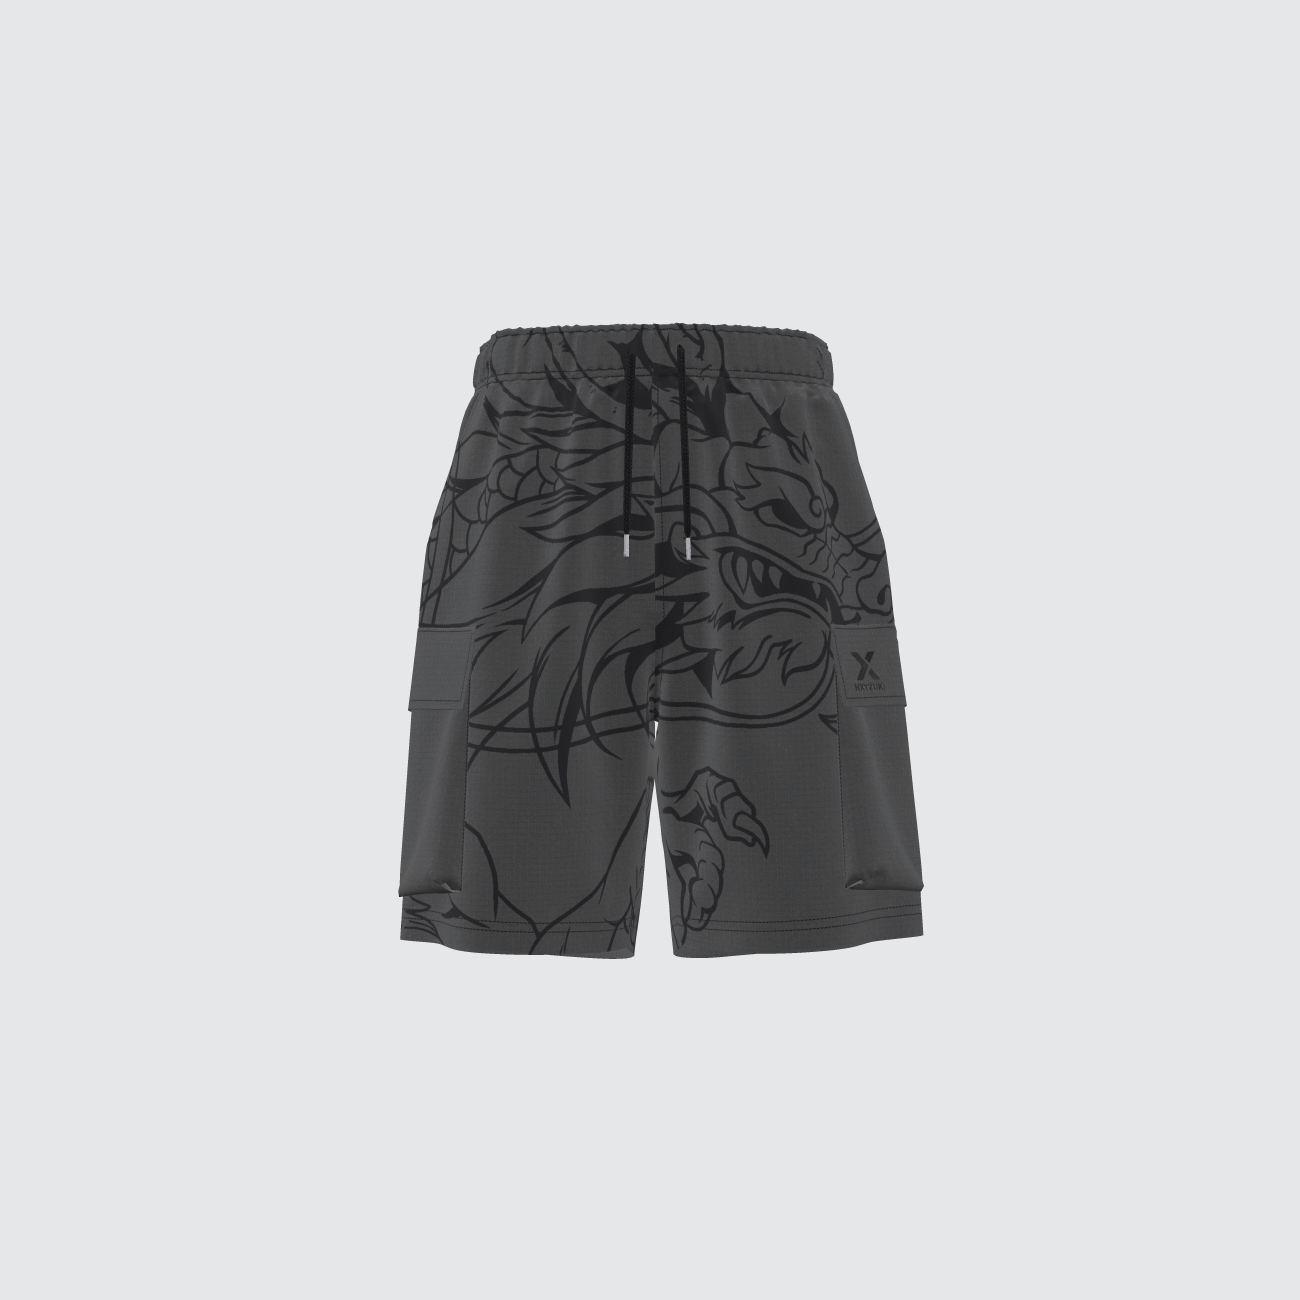 NXT Year of The Dragon, Utility Shorts